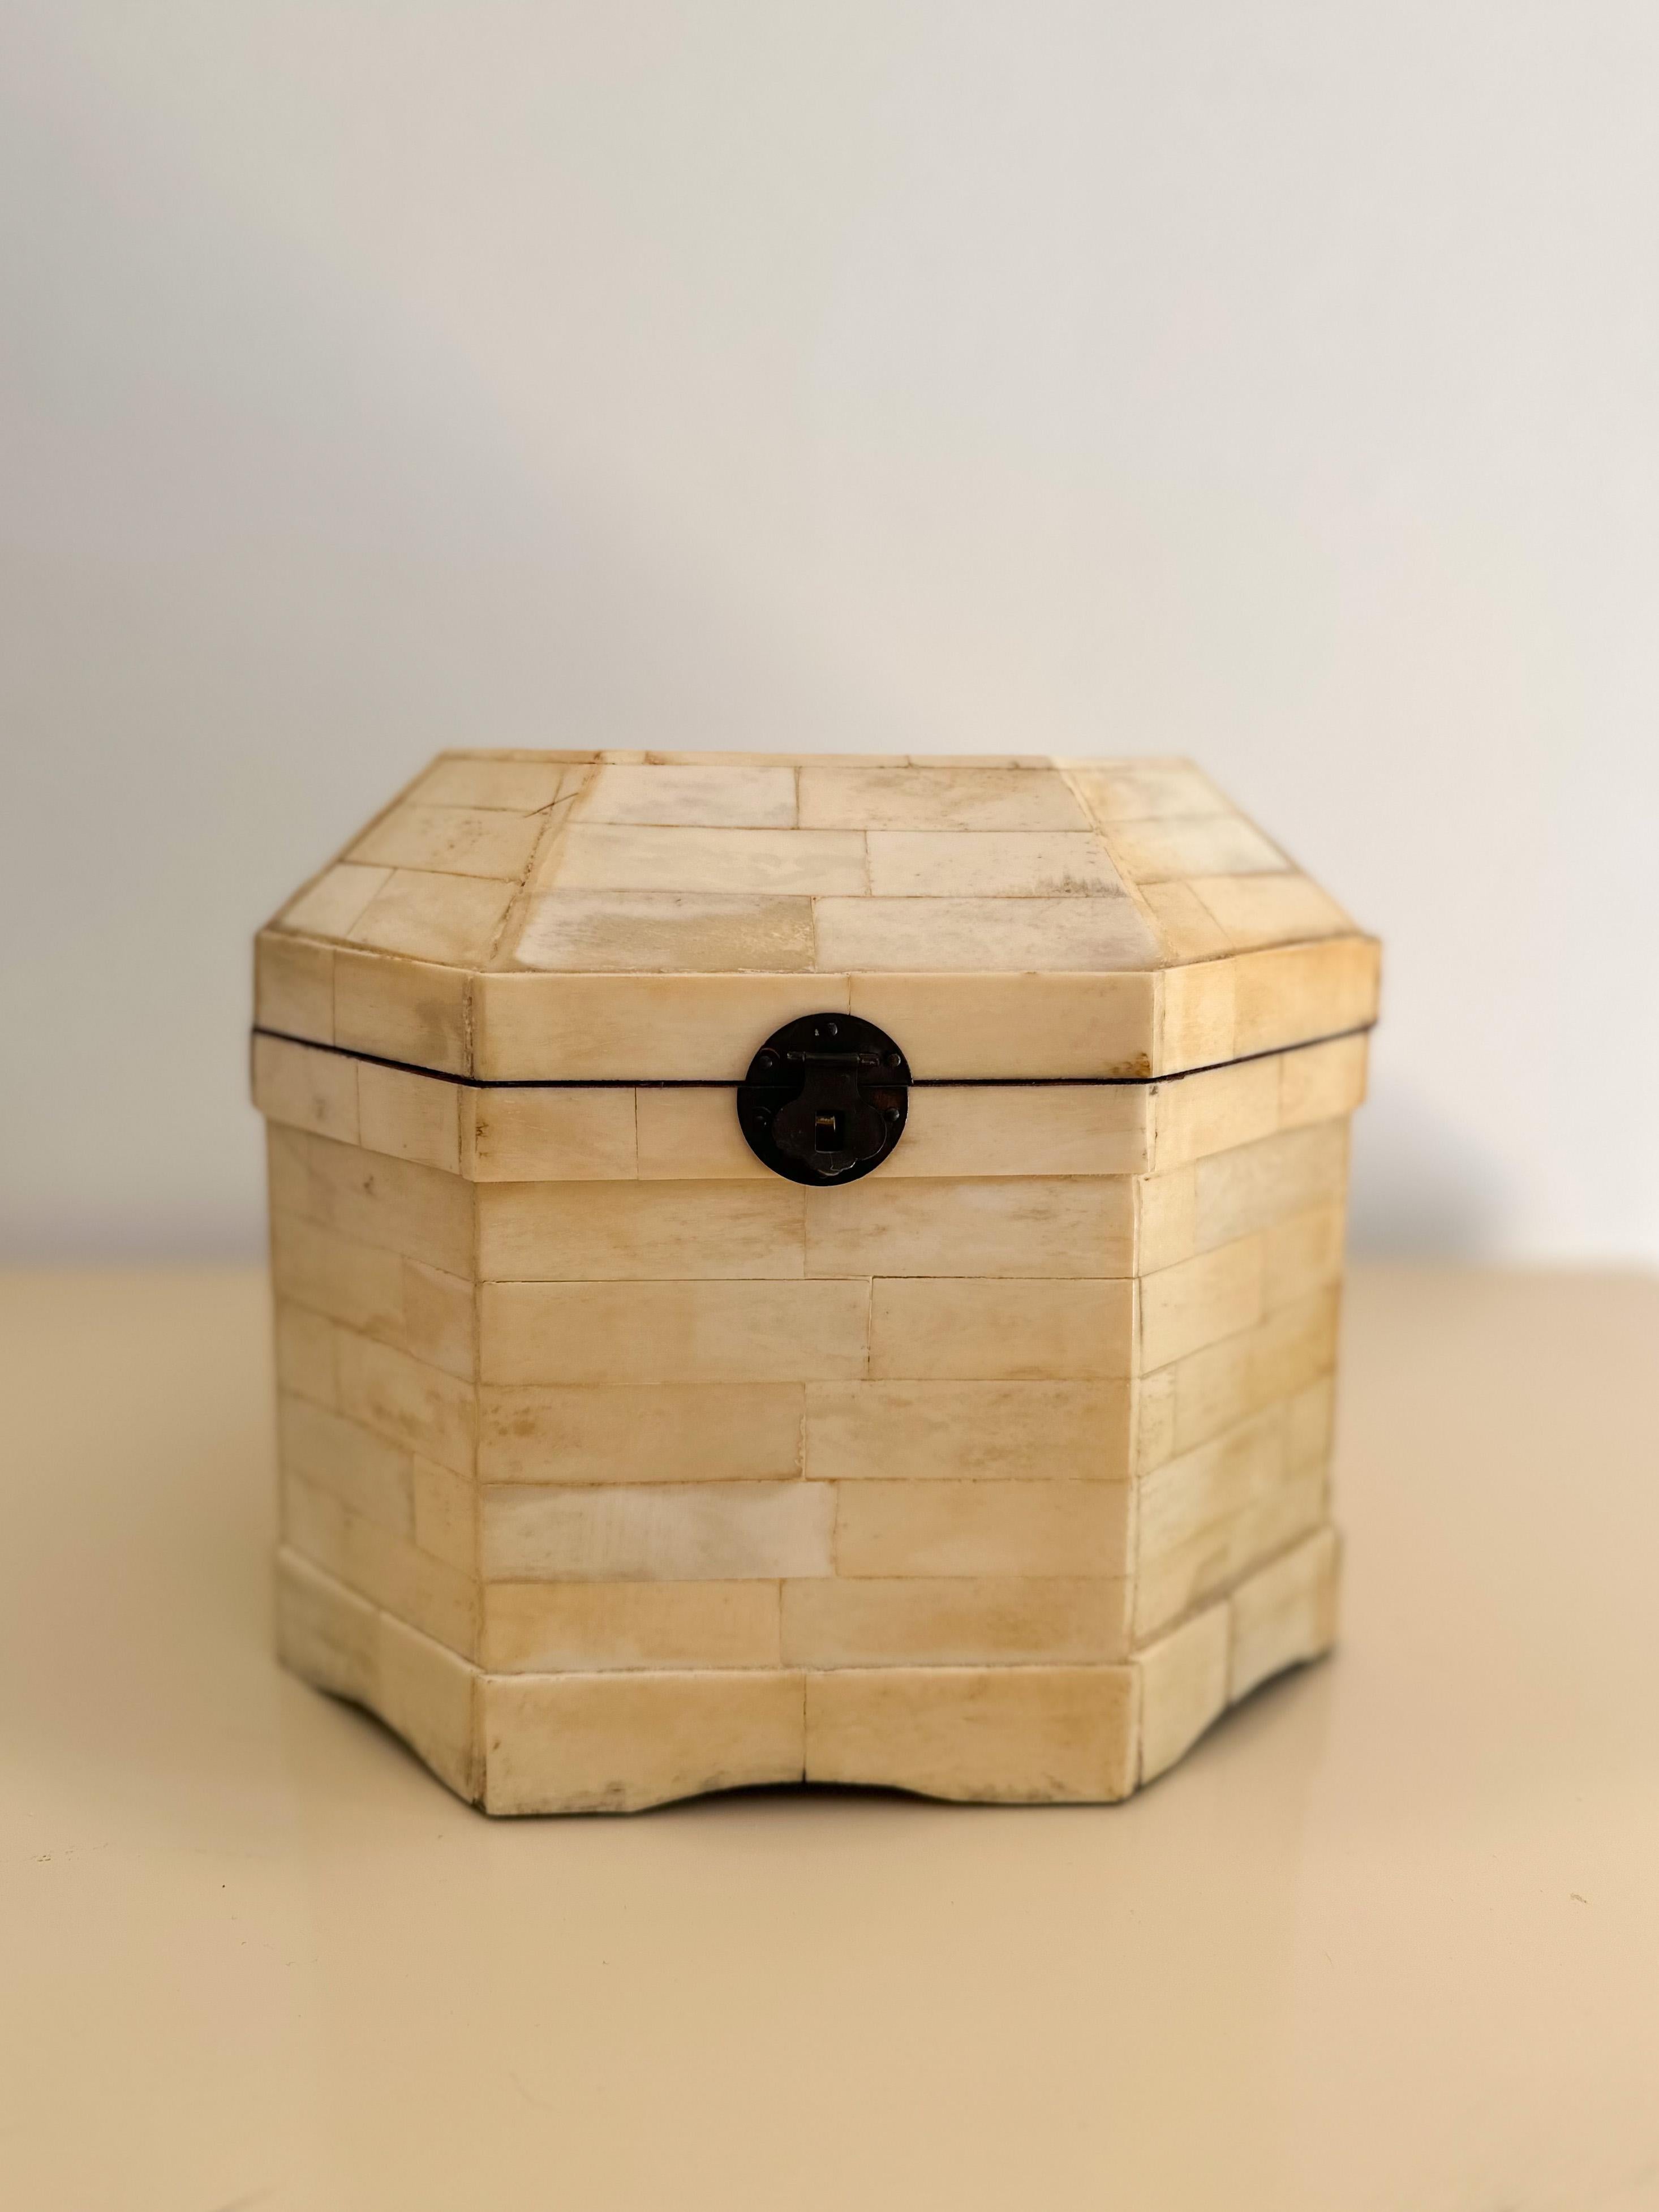 Vintage octagonal box made of ivory bone in a brick pattern, with maroon velvet lining and a brass clasp securing the hinged lid. These substantial boxes can fit loads of treasures. Two boxes are available and sold separately, each displaying light